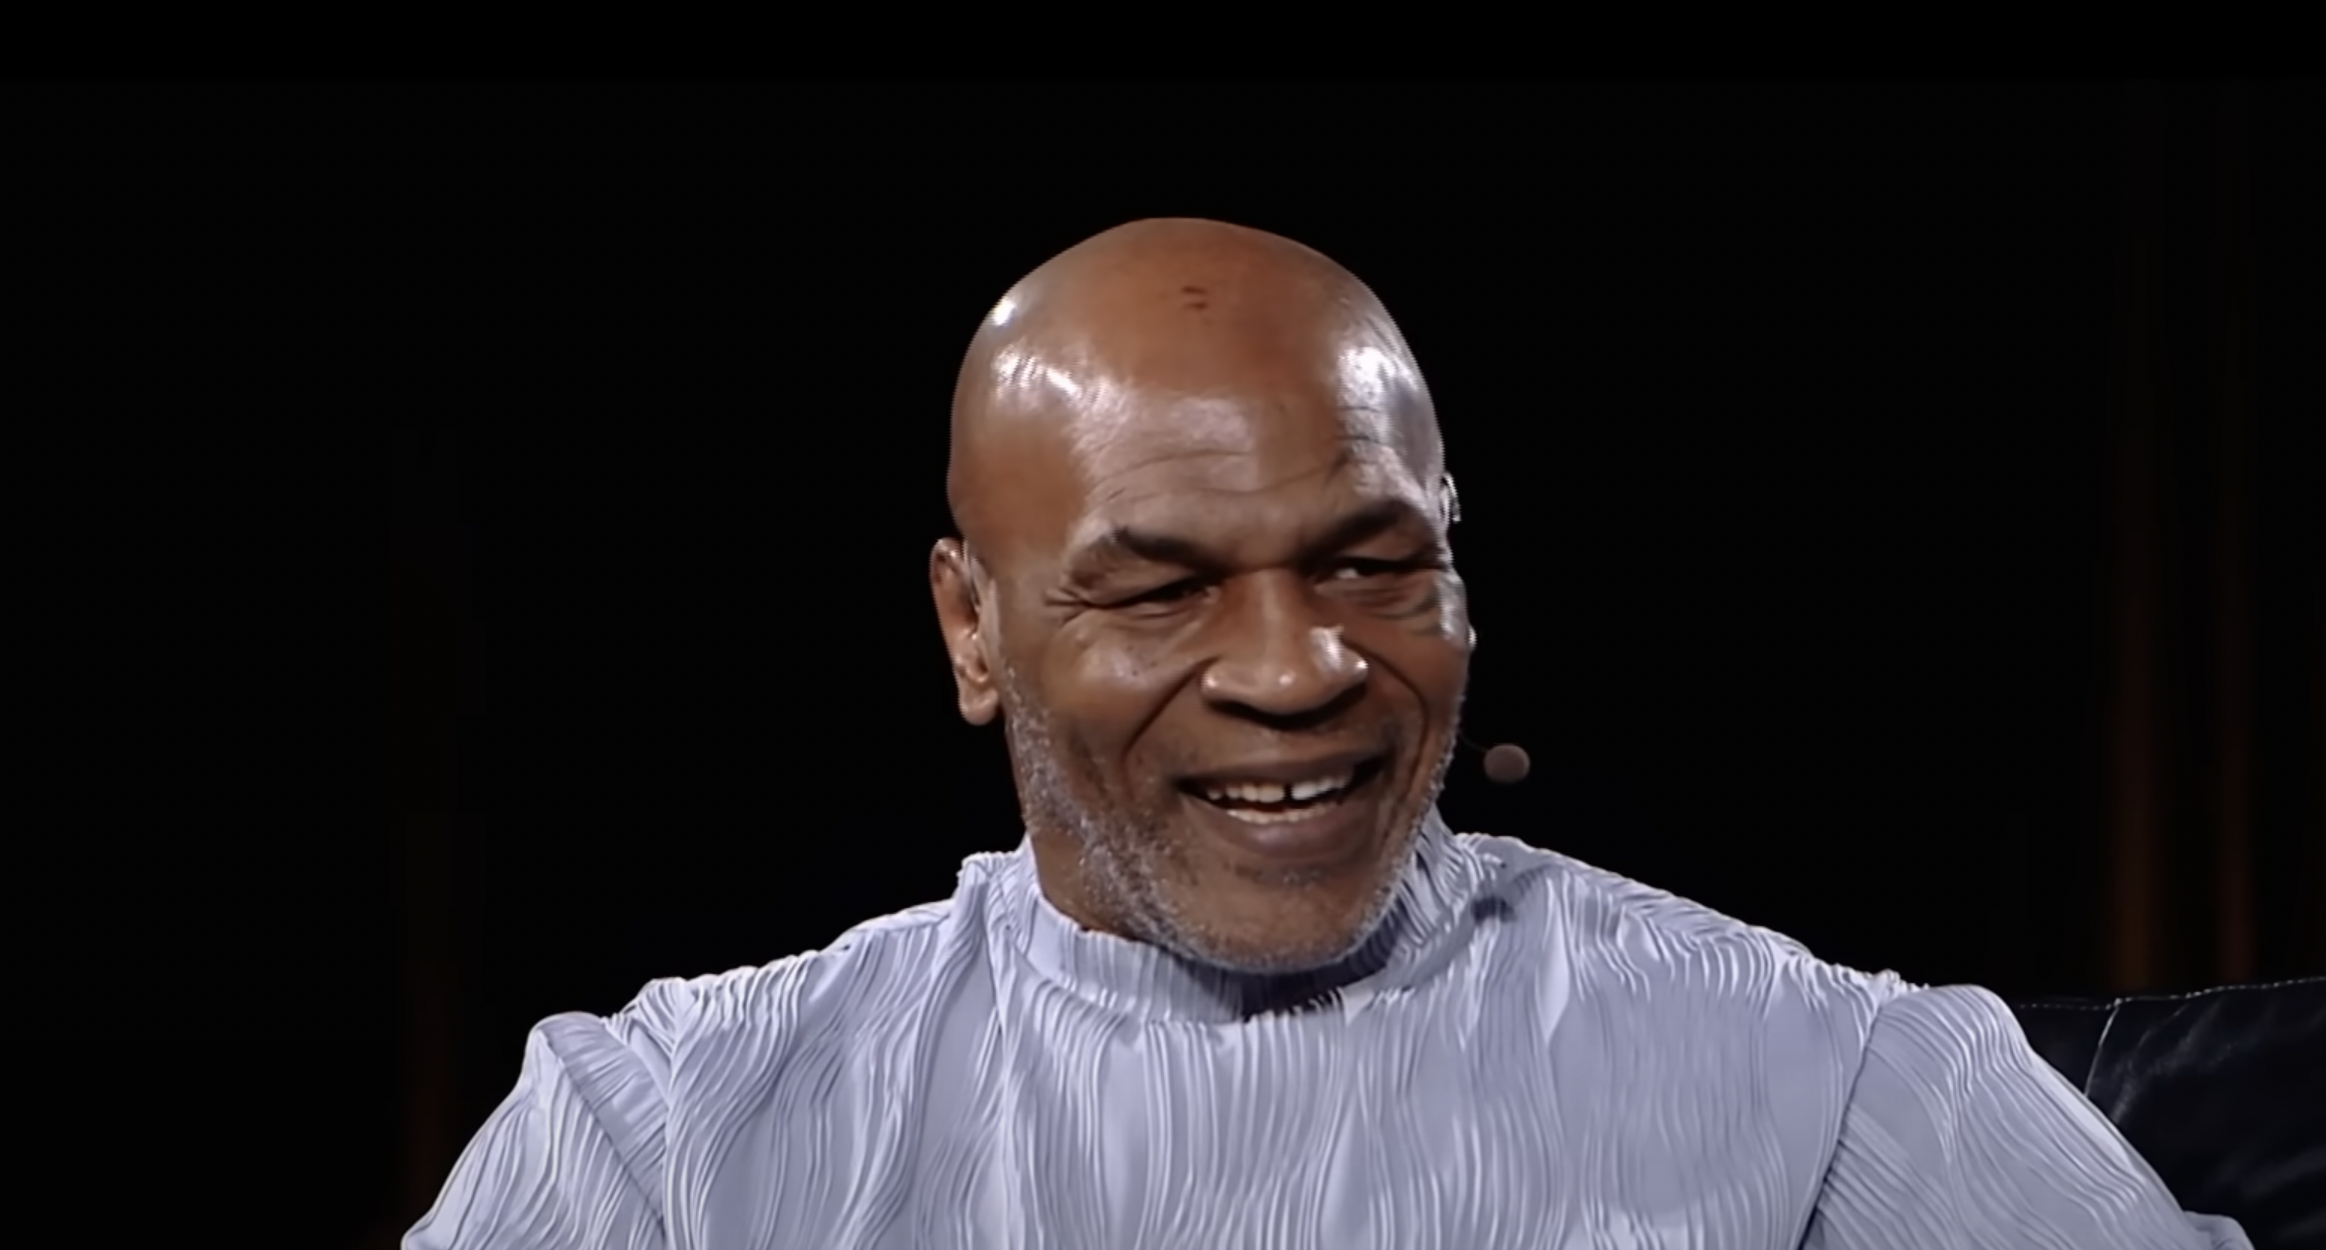 Mike Tyson Offered Zoo Keeper $10,000 to Fight a Silverback Gorilla